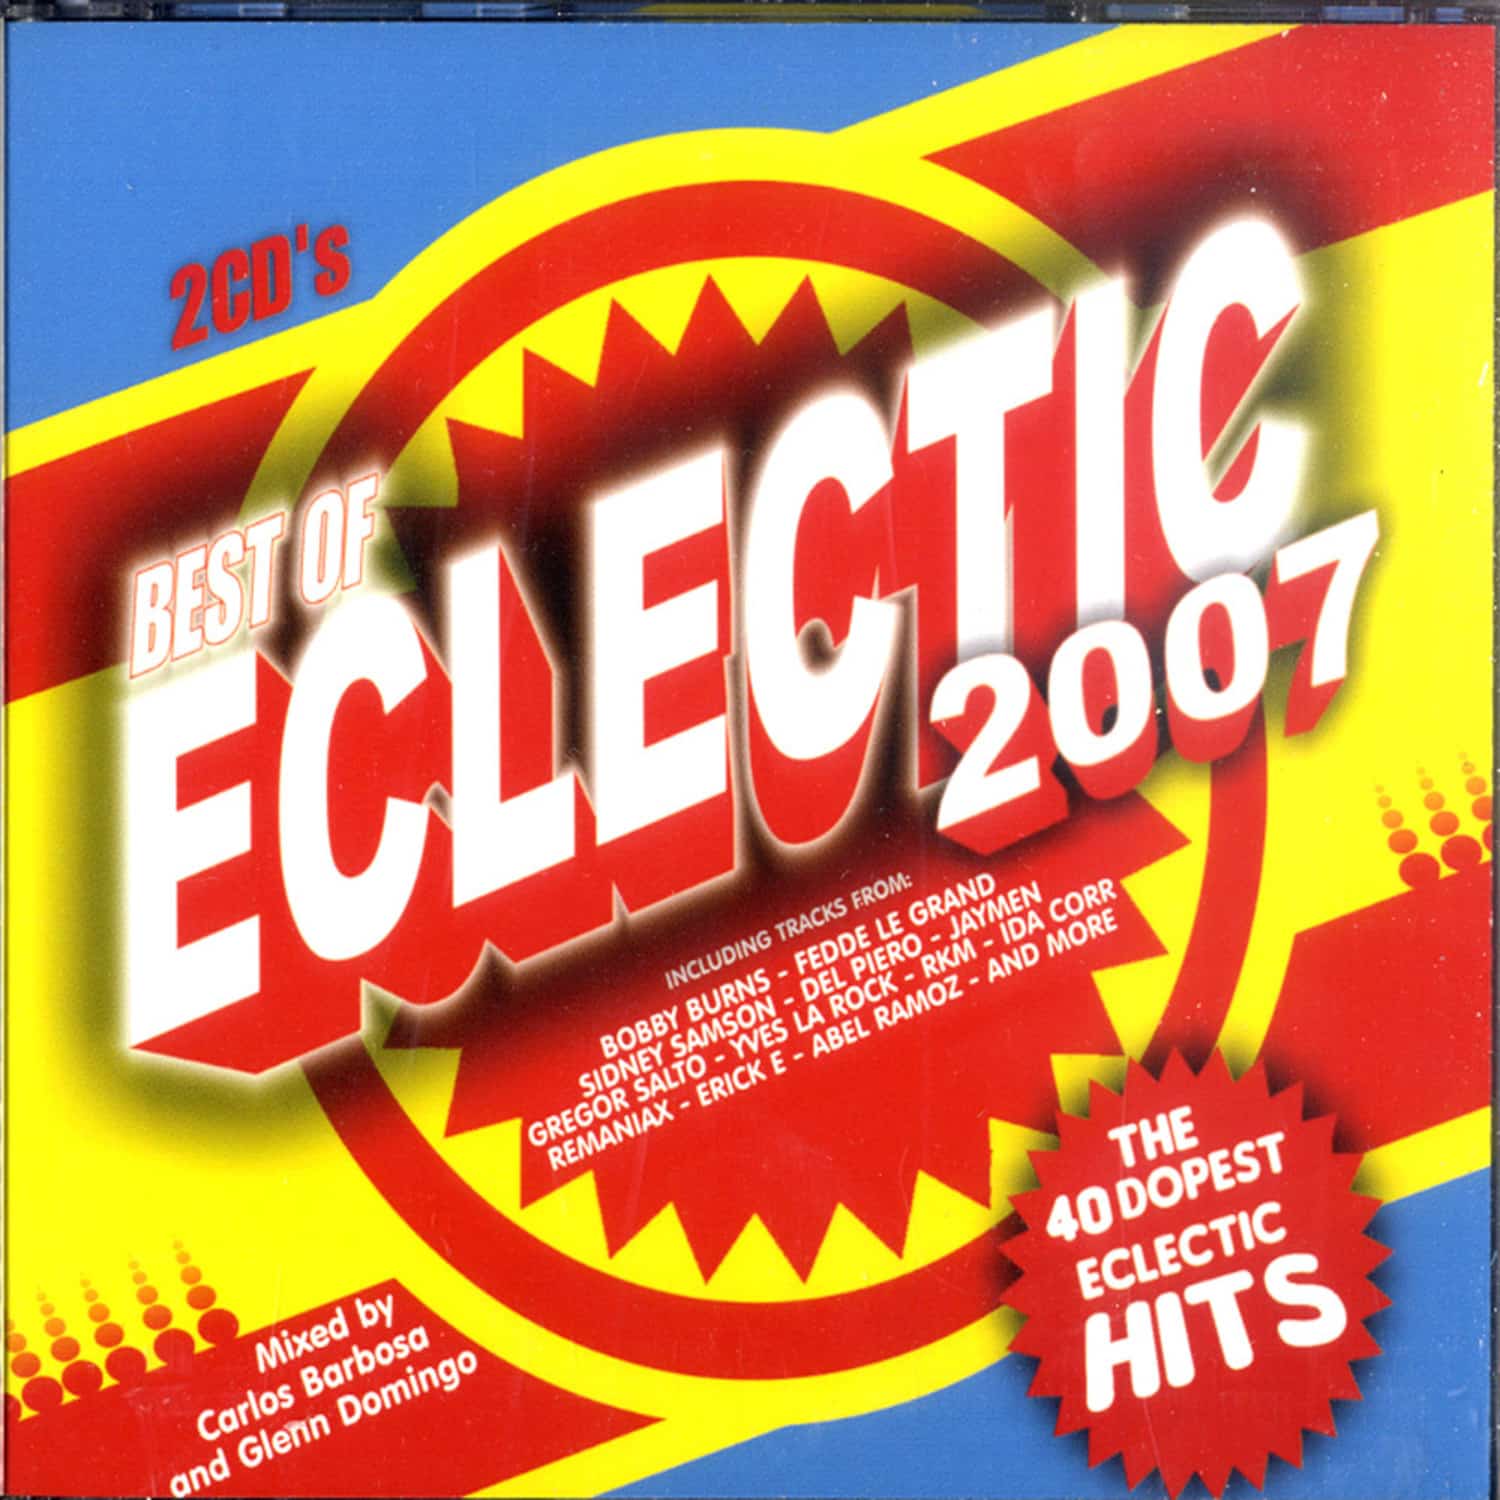 Various Artists - THE BEST OF ELECTRIC 2 